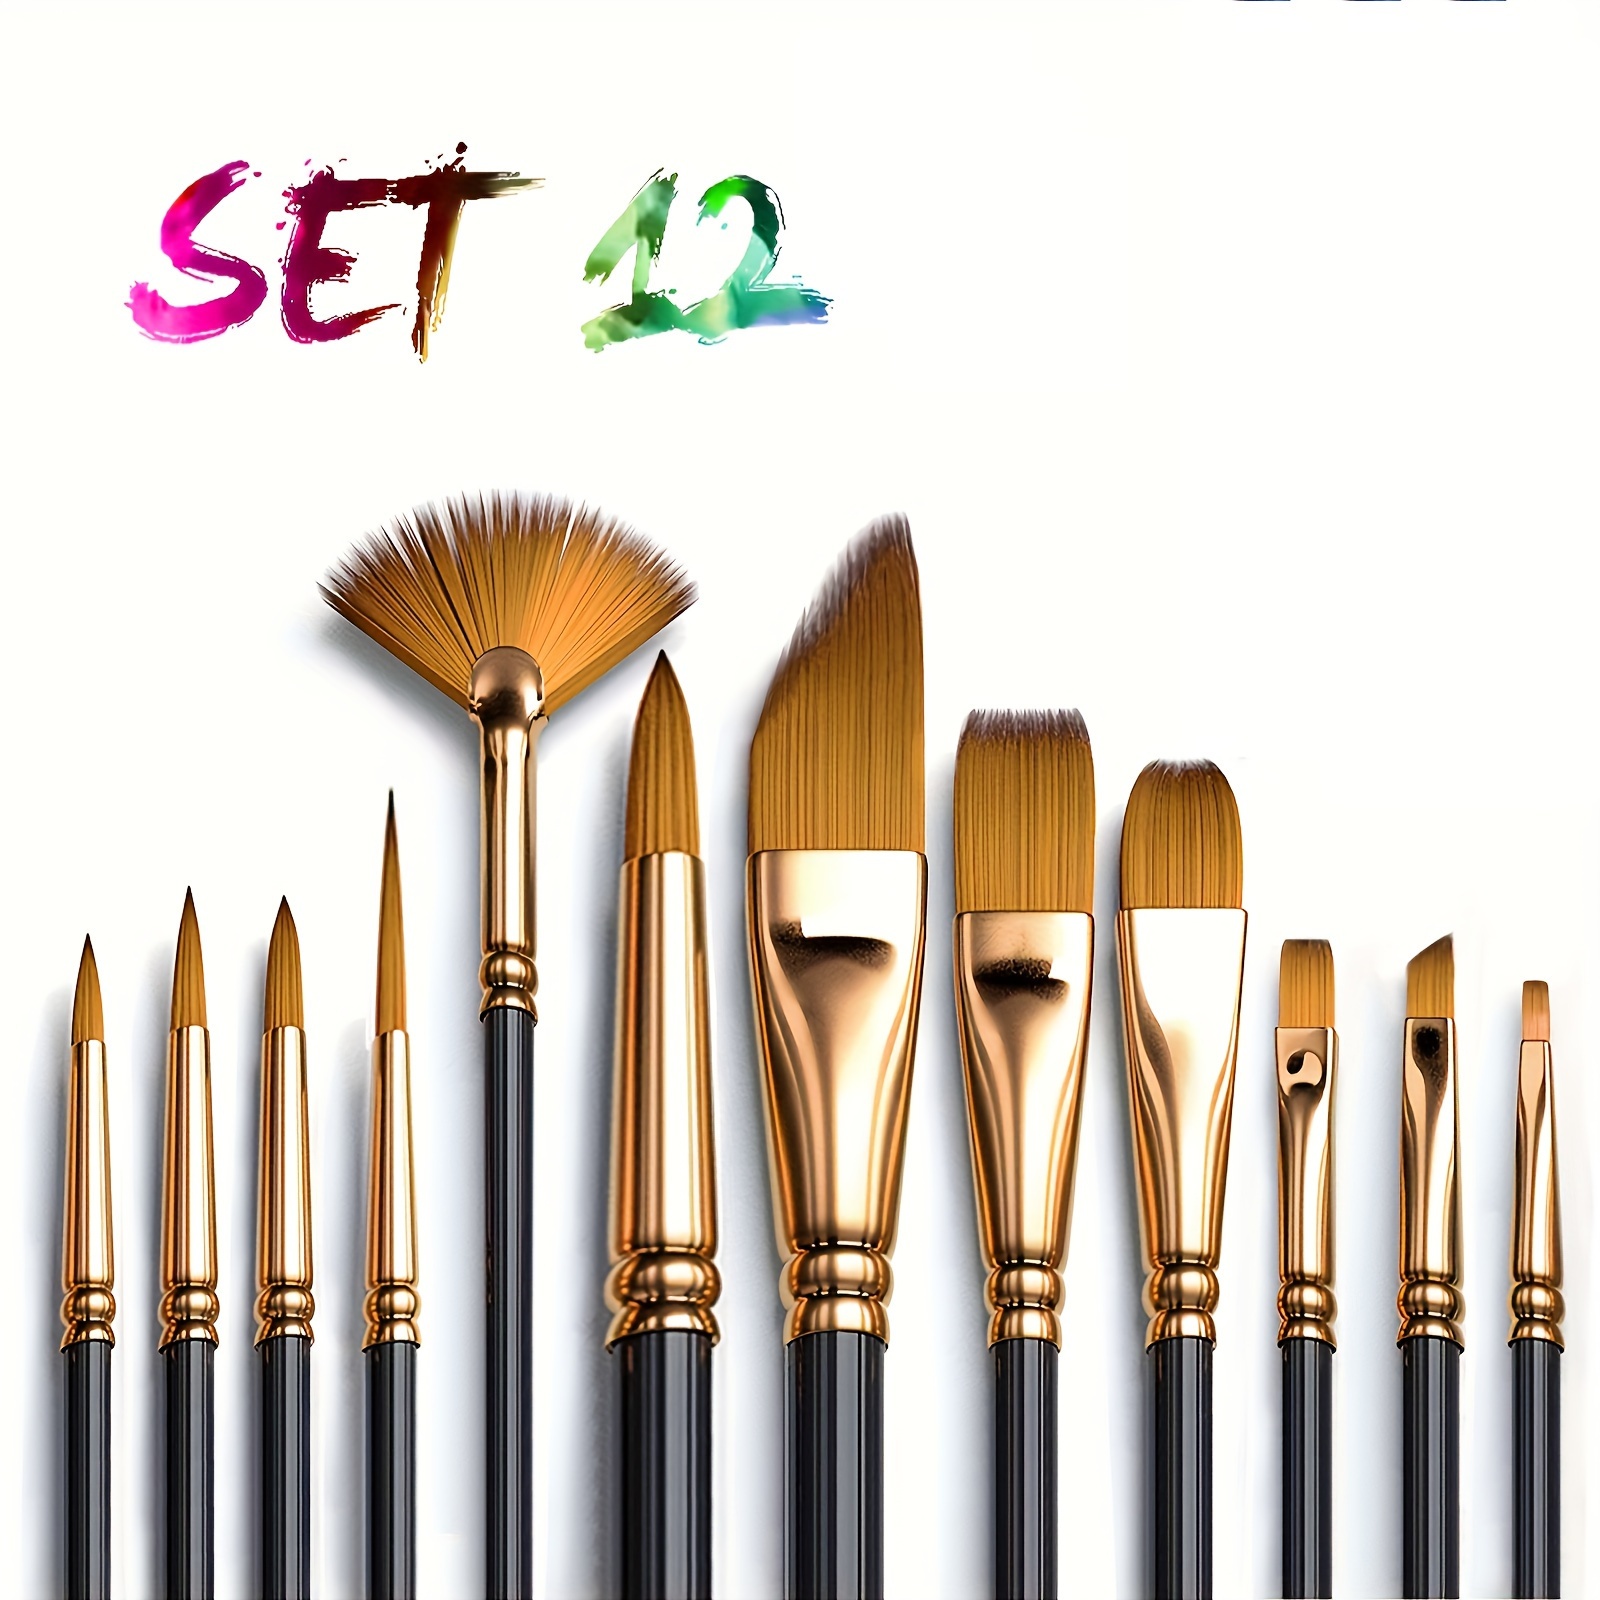 

Professional Artist Paint Brush Set - 12 Pack Plastic Handle Brushes For Acrylic, Oil, Watercolor, Gouache And Canvas Painting - Versatile Round, Fan, Filbert, Flat Tips